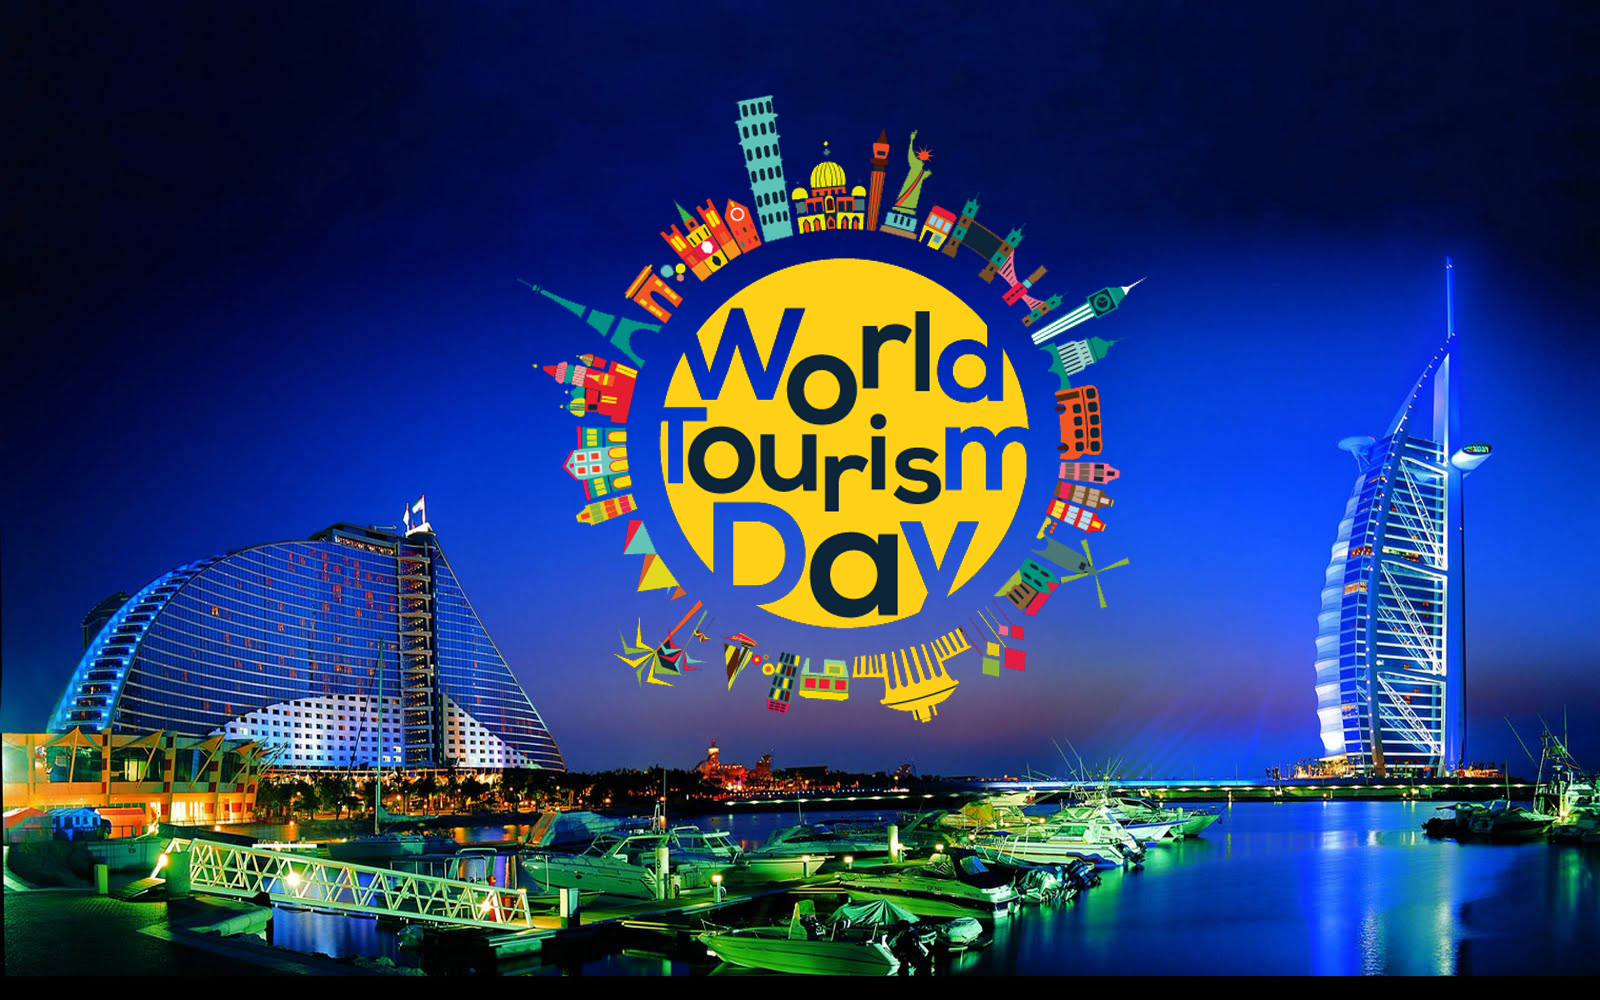 Best World Tourism Day Quotes, Images & Wallpapers - World Tourism Day 2019 - HD Wallpaper 